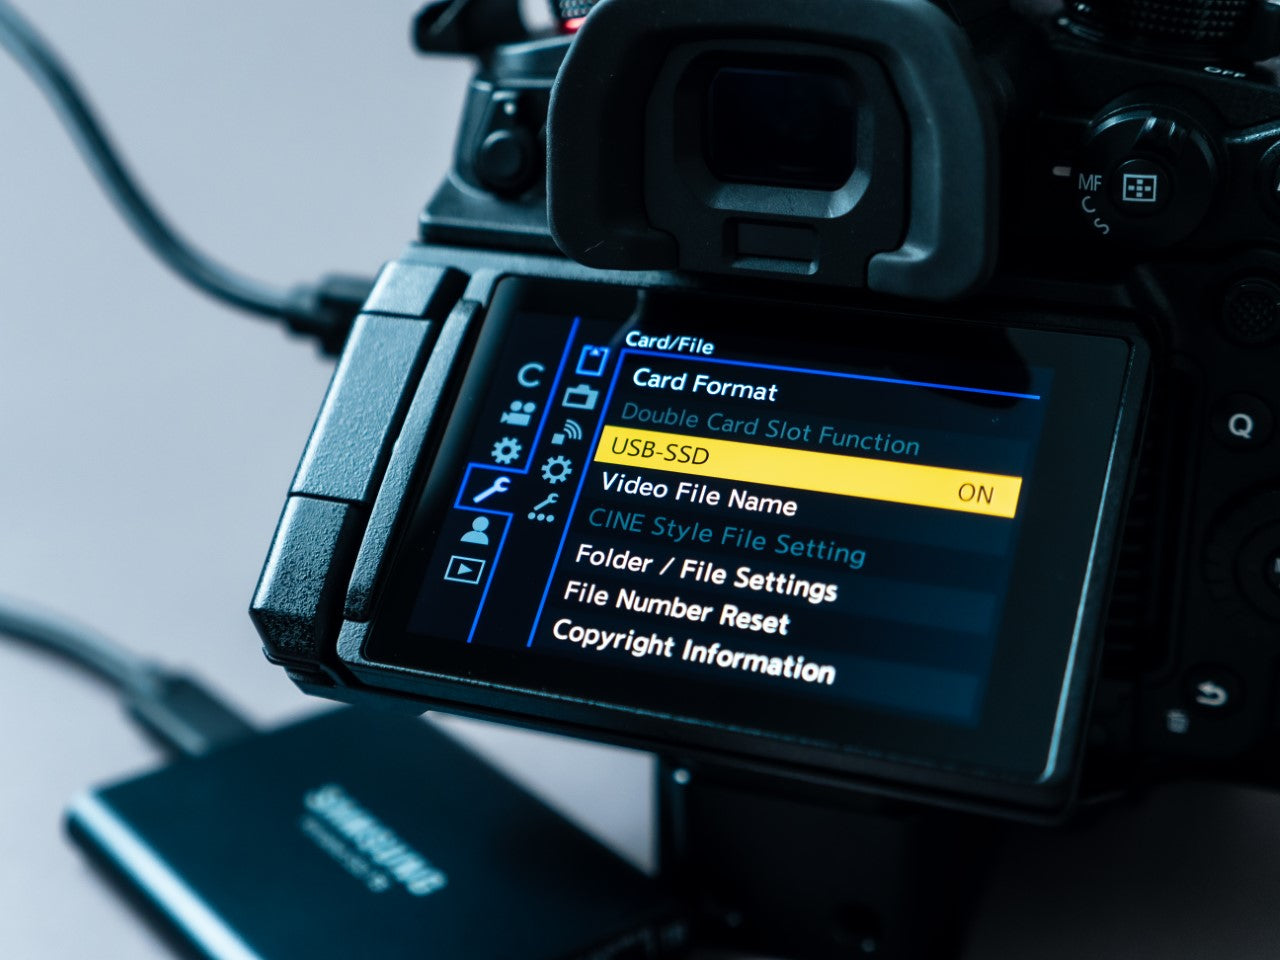 Panasonic Announces the Release of Firmware Version 2.2 for GH6  To Support Direct SSD Recording over USB